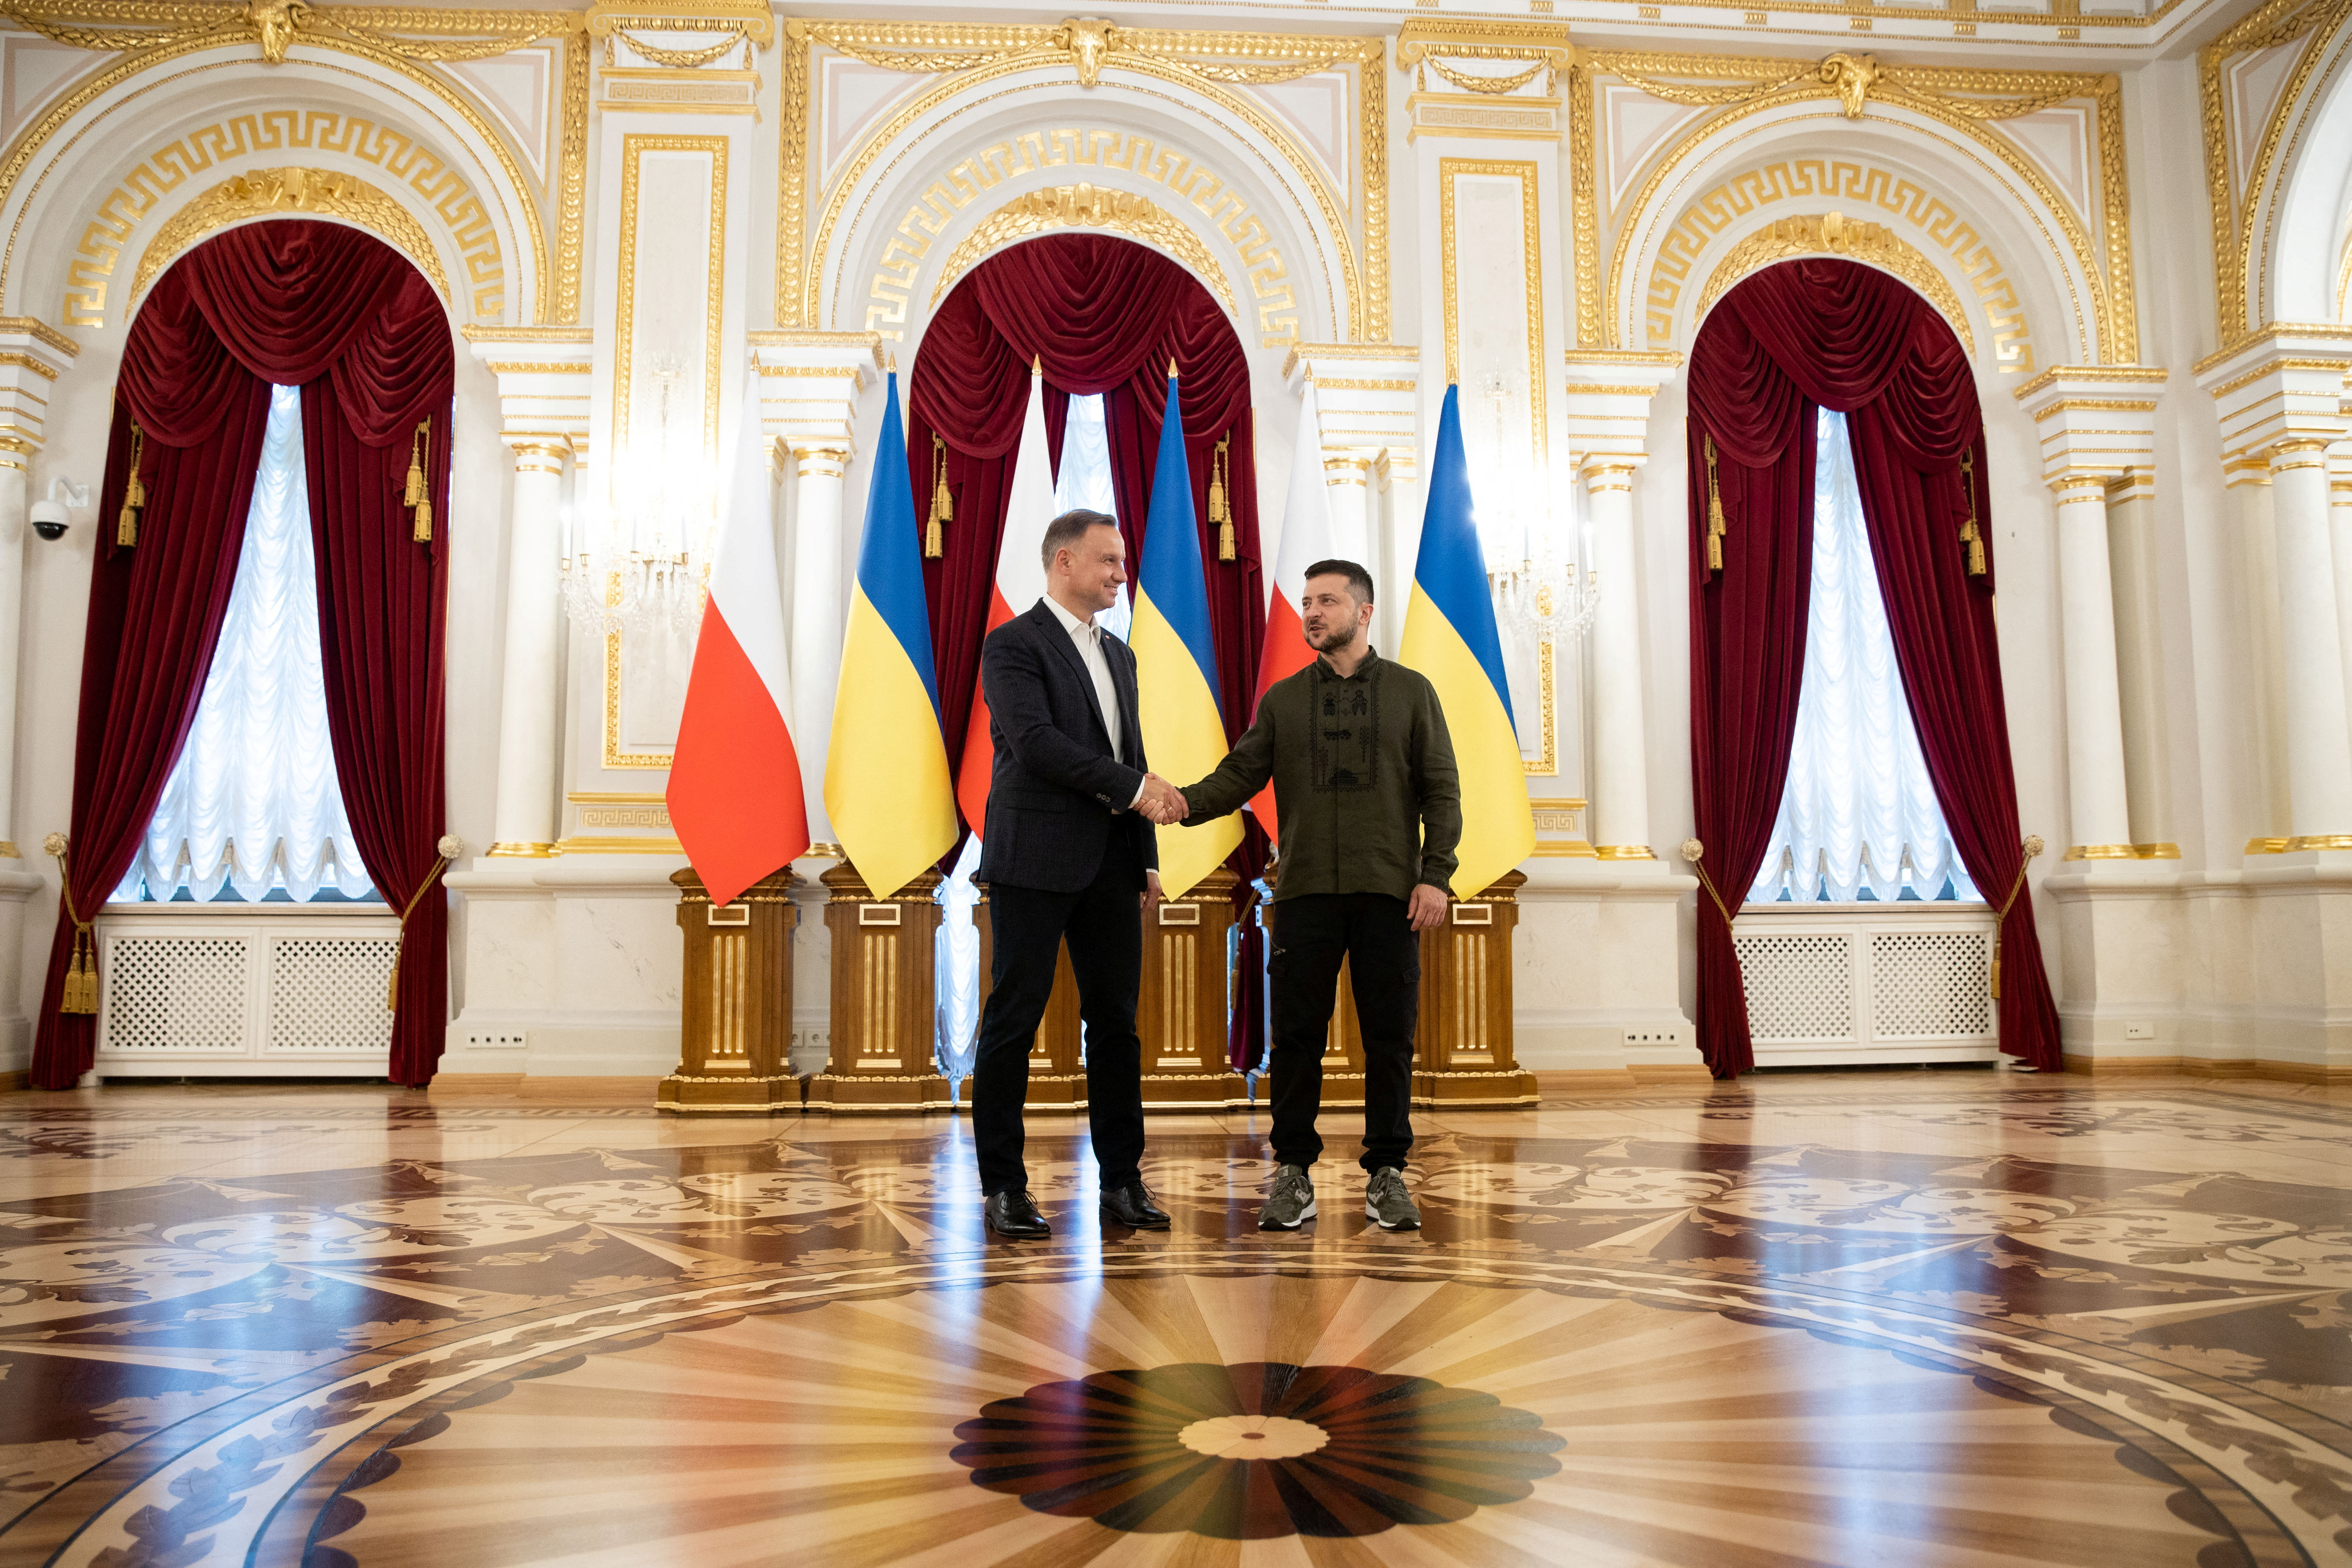 Ukraine's President Zelenskiy and Poland's President Duda pose for a picture in Kyiv